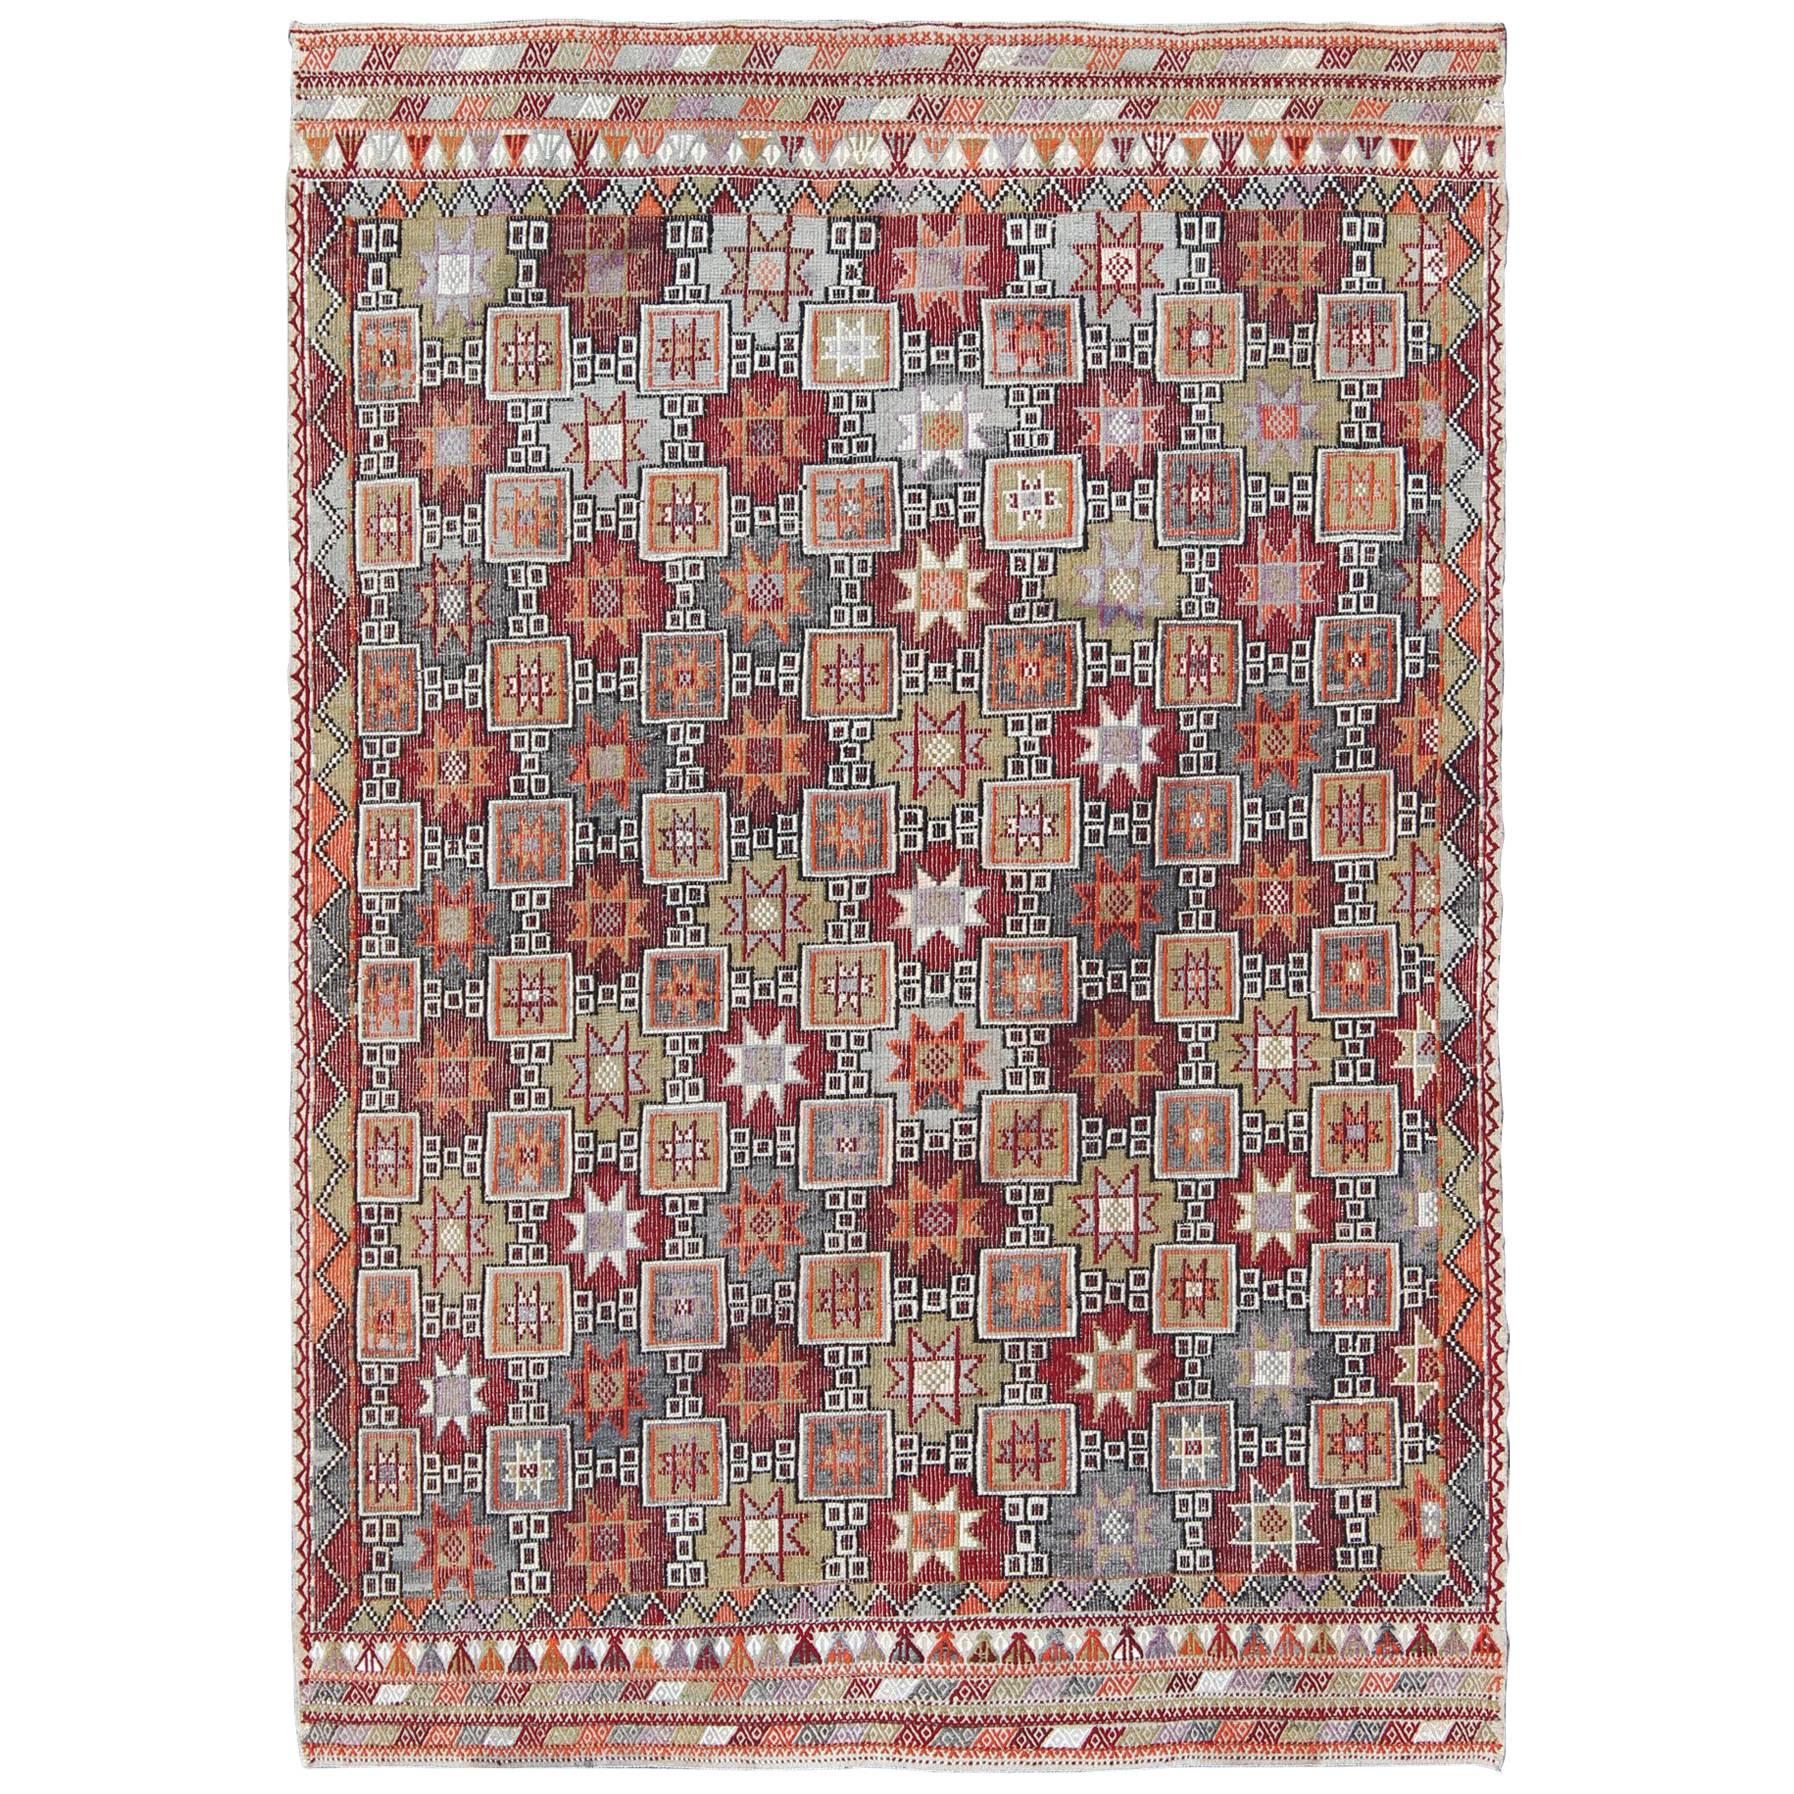 Turkish Vintage Embroidered Kilim Rug With Tribal Star Shapes in Colorful tones For Sale